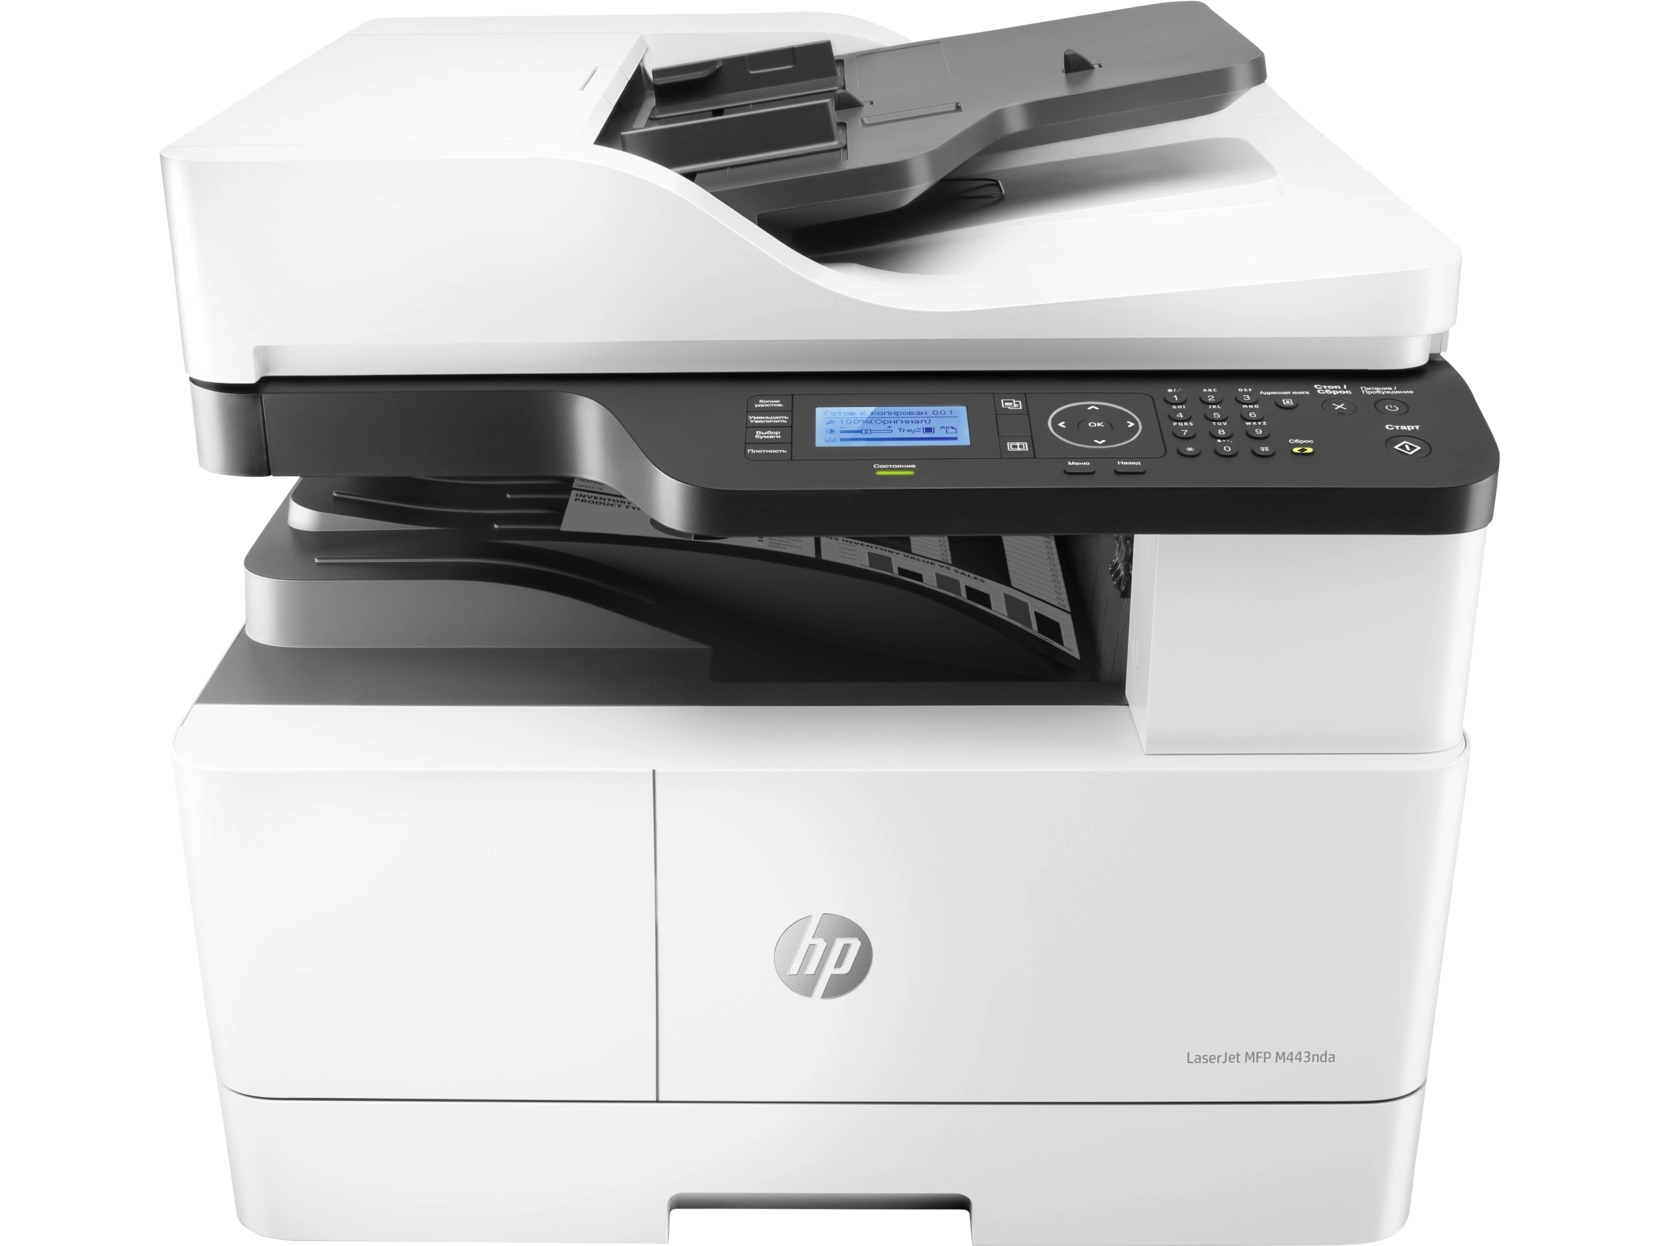 MFP A3 HP LaserJet M443nda, White, up to 25ppm,RADF 100p, 1200*1200 dpi, Duplex, 512MB, 600dpi, 4-Line LCD display, up to 50000 p/m, input 350 p,USB 2.0, 10/100 Base TX , HP PCL 6, Toner W1335A/X (7,400/13,700 pages), Drum CF257A  (80,000 pag)